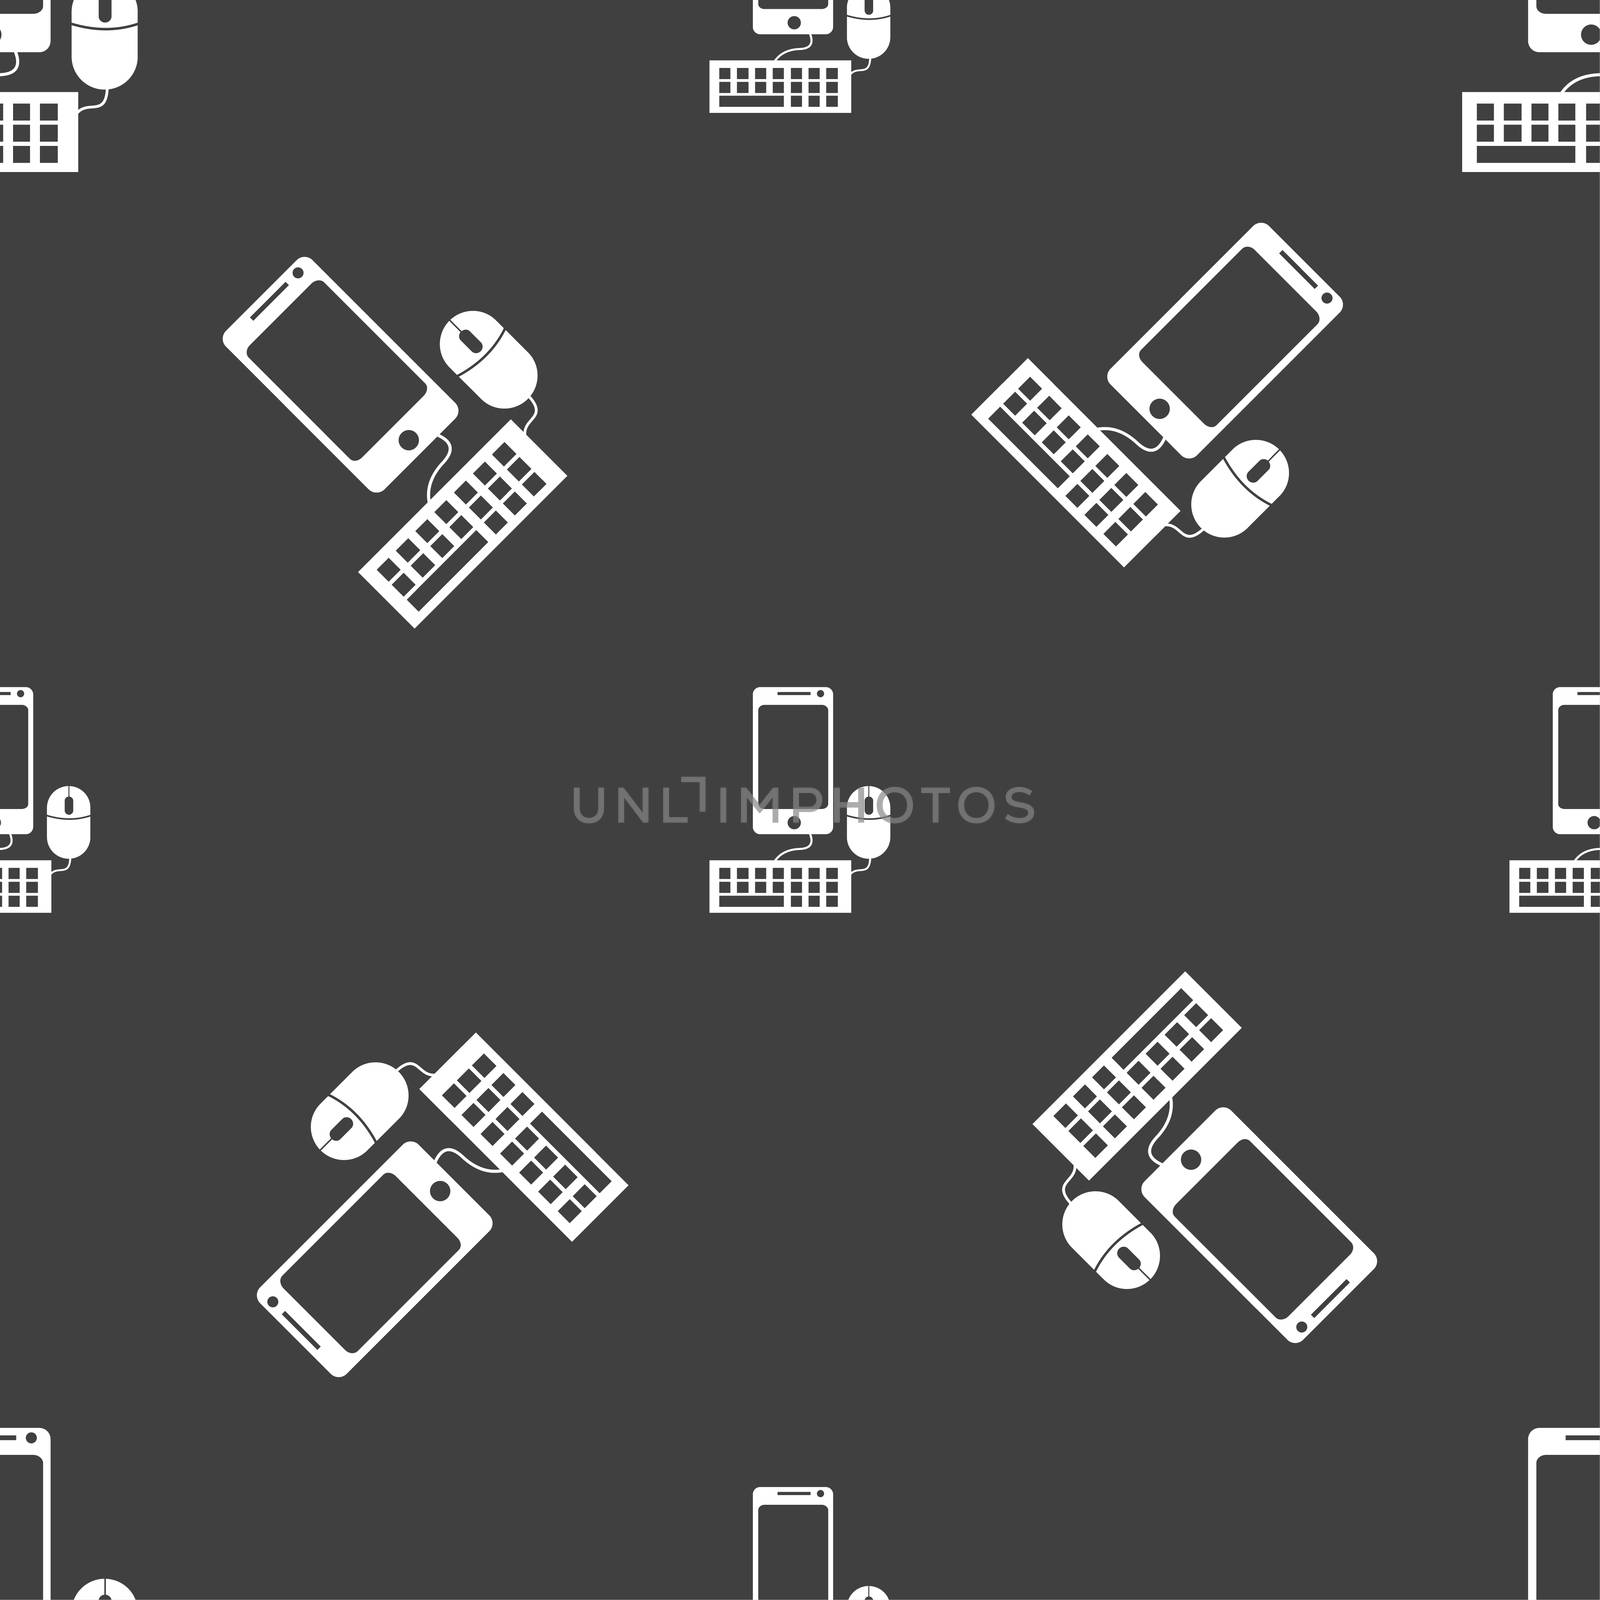 smartphone widescreen monitor, keyboard, mouse sign icon. Seamless pattern on a gray background. illustration